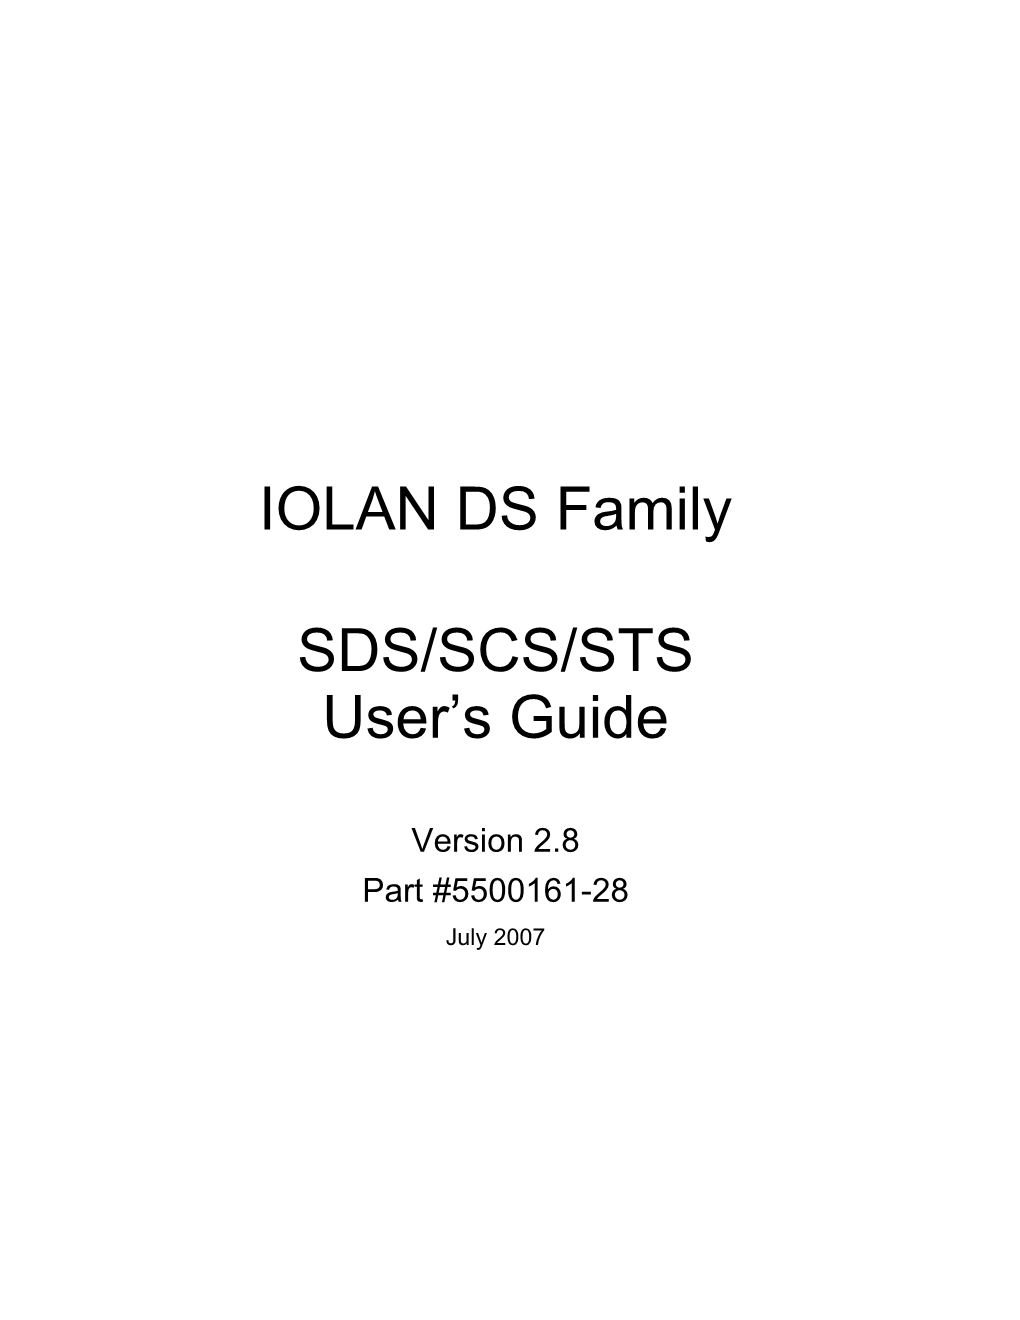 IOLAN DS Family SDS/SCS/STS User's Guide